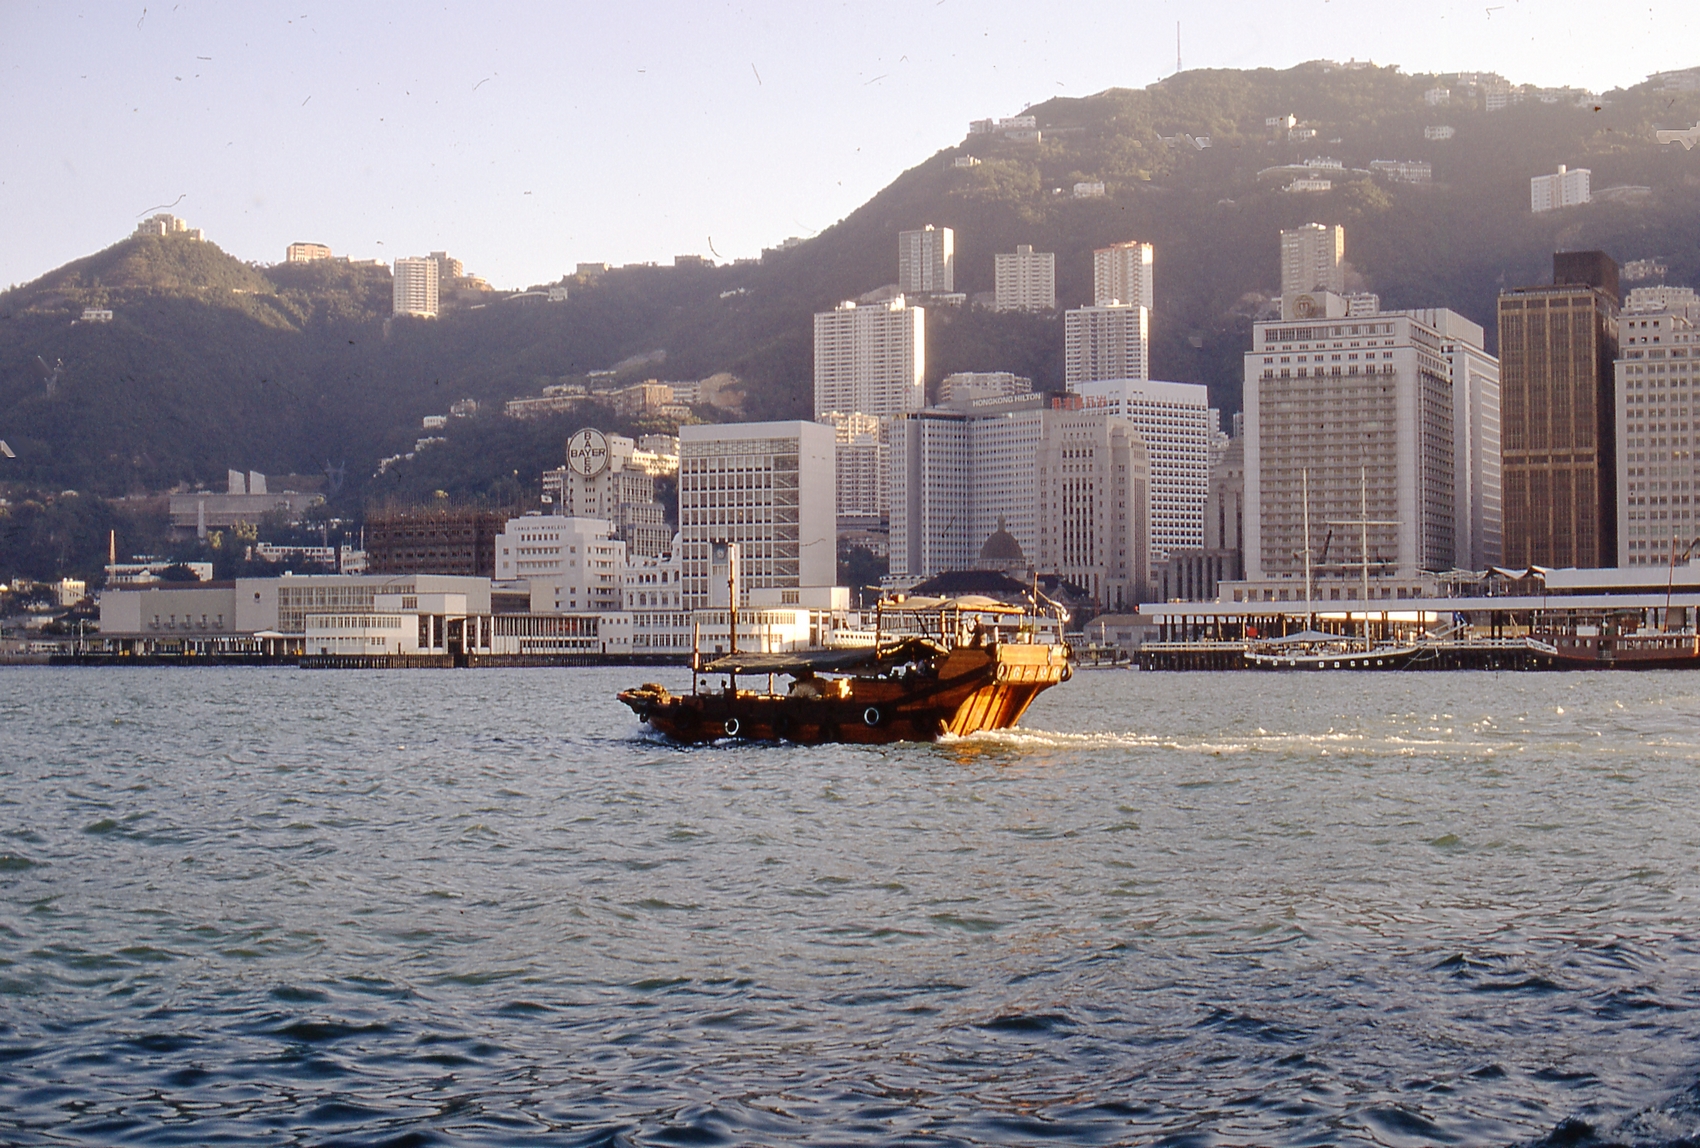 Full-colour vintage photography from old Hong Kong – scenery, transport, harbour views. Photo: Supplied.